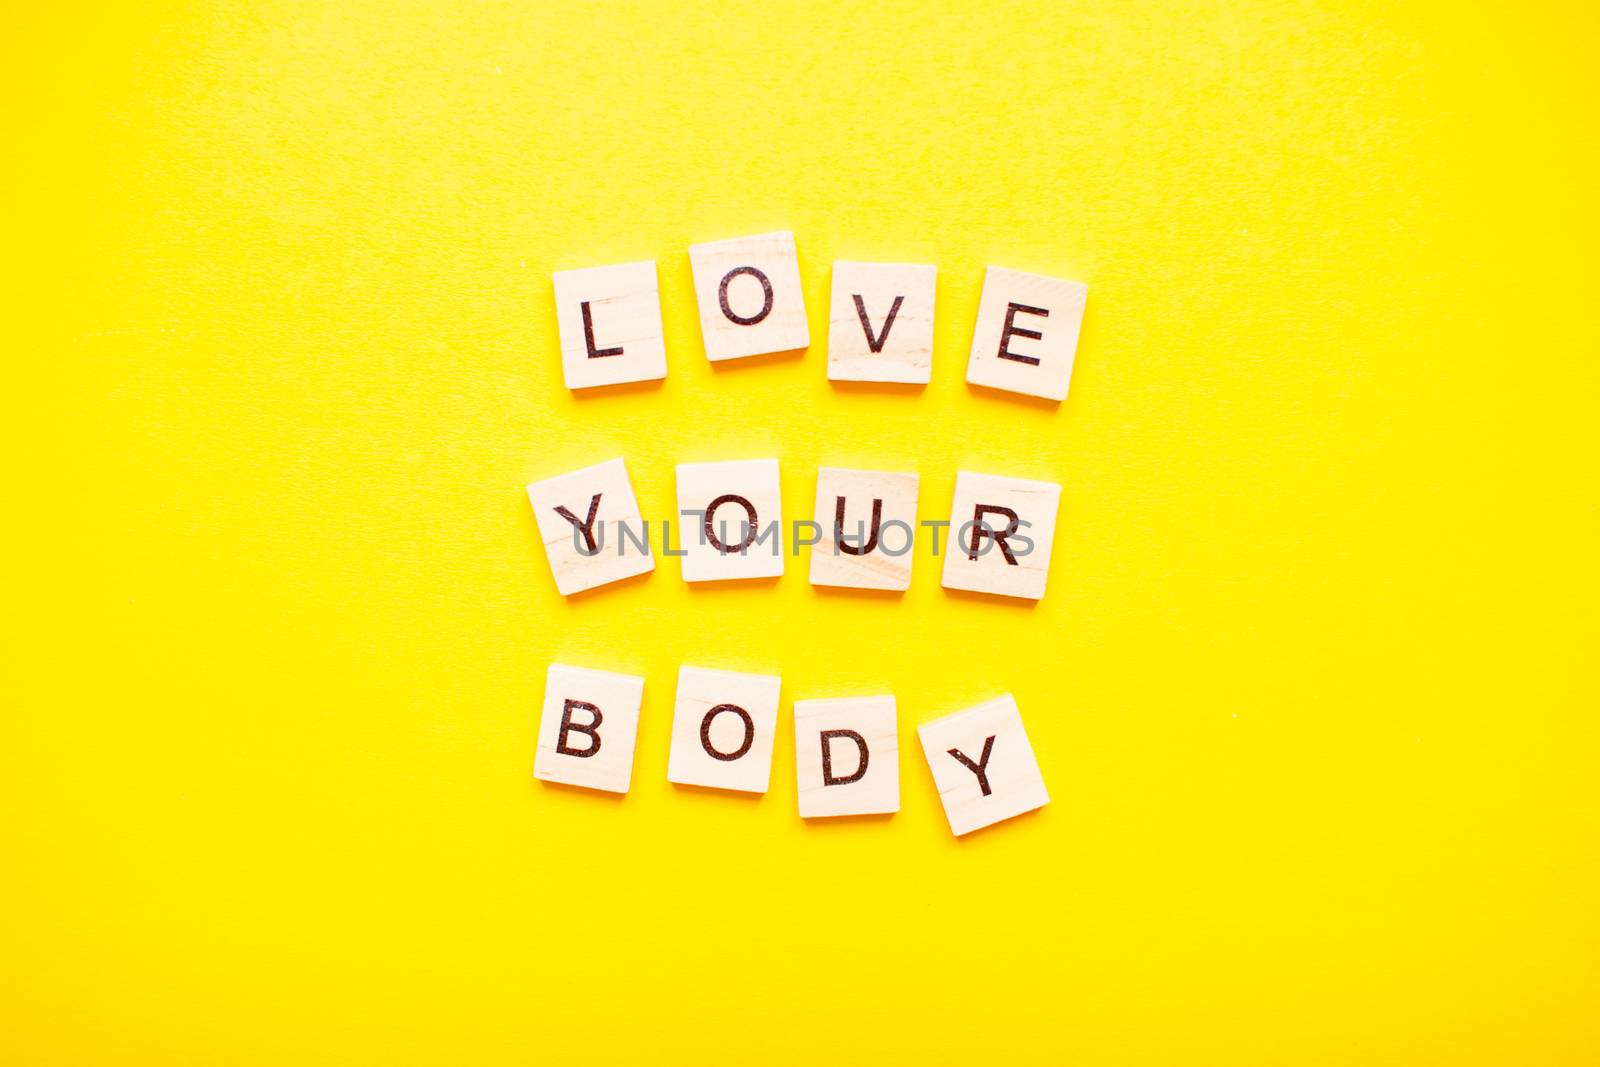 The inscription love your body made of wooden blocks on a light yellow background.